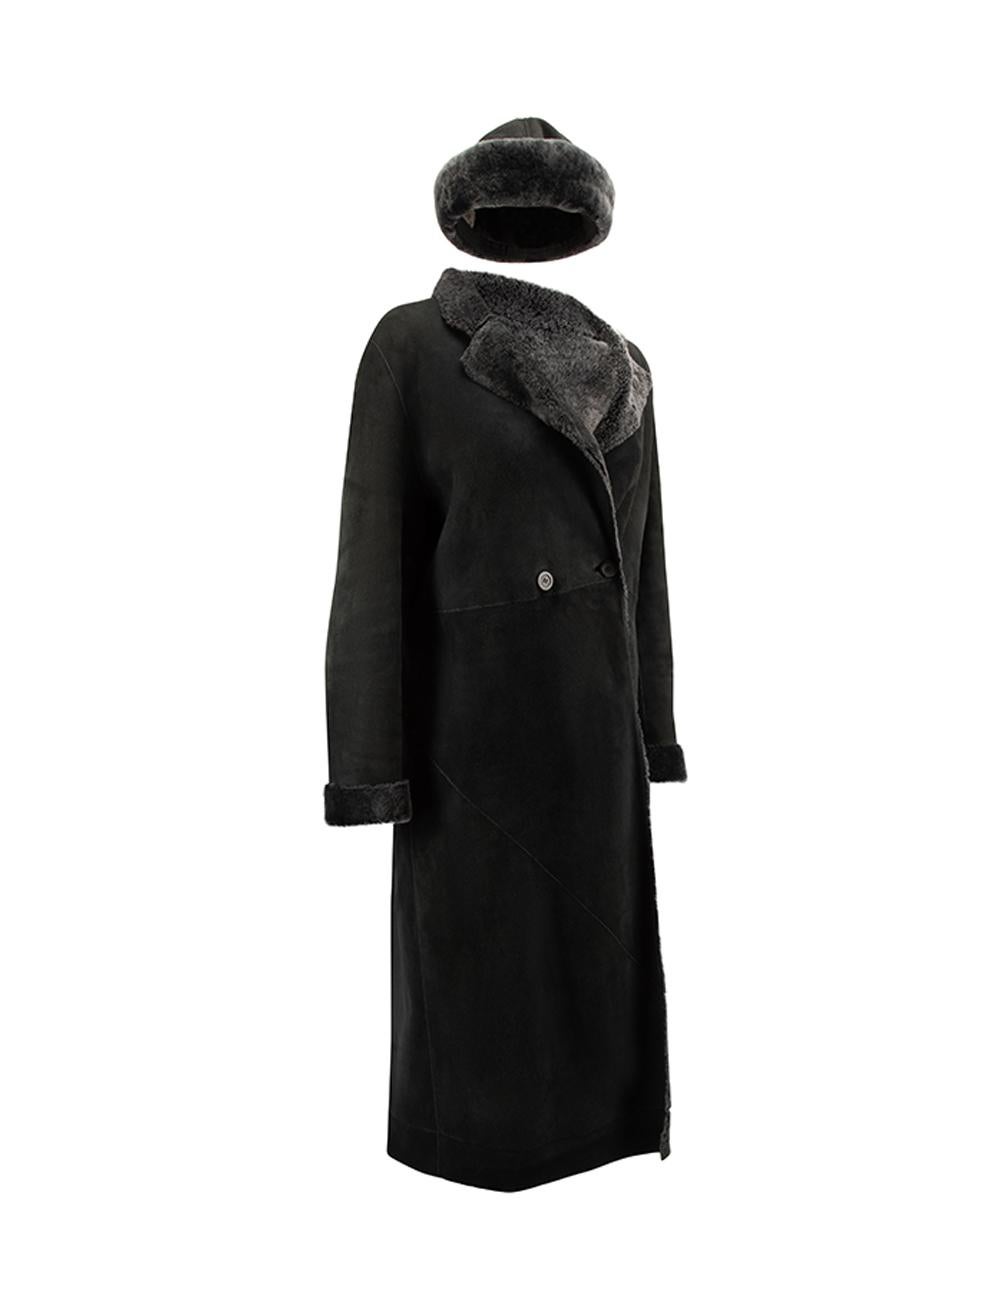 CONDITION is Very good. Minimal wear to coat is evident. Minimal wear to the brand label as one side has become unstitched on this used Loewe designer resale item. 



Details


Black

Suede

Long coat

Double breasted

Matching trapper